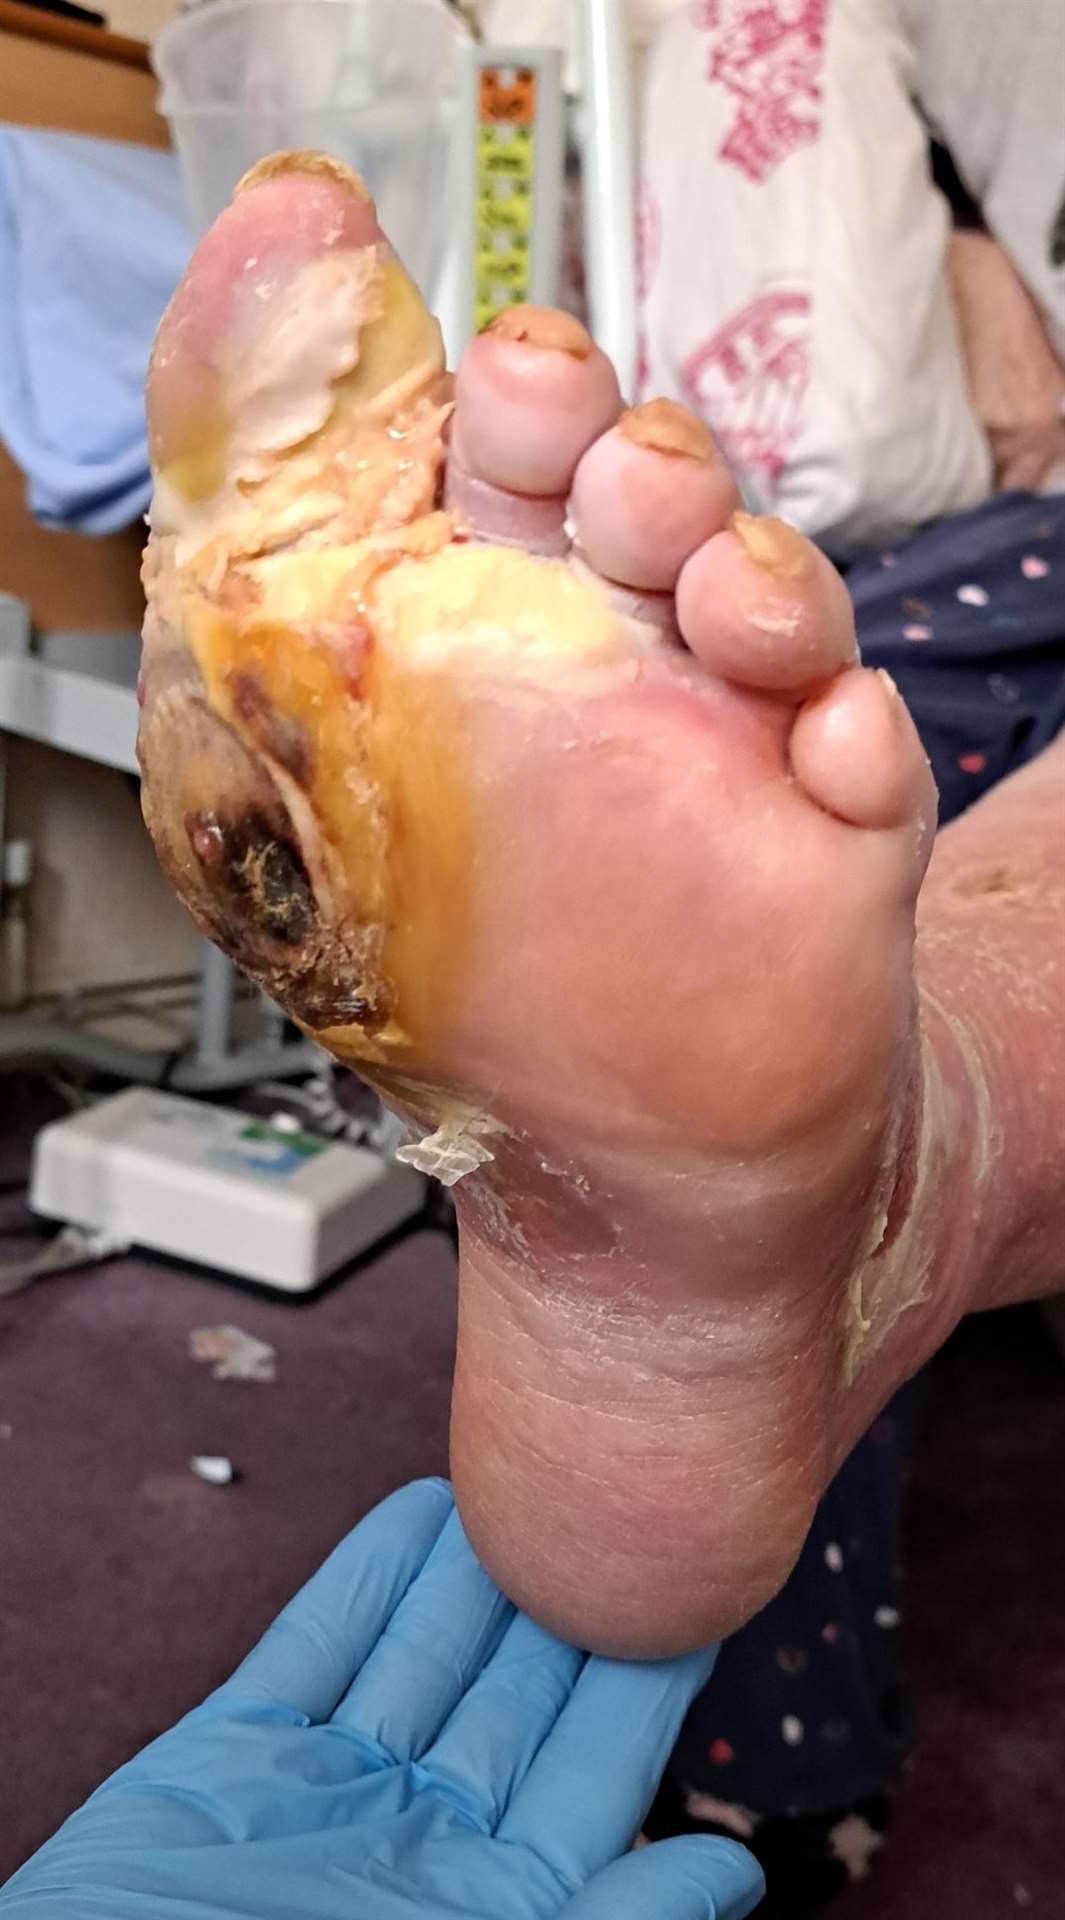 WARNING: Graphic image. Mrs Medhurst's foot developed an infection which led to three of her toes being removed. Photo: Family release